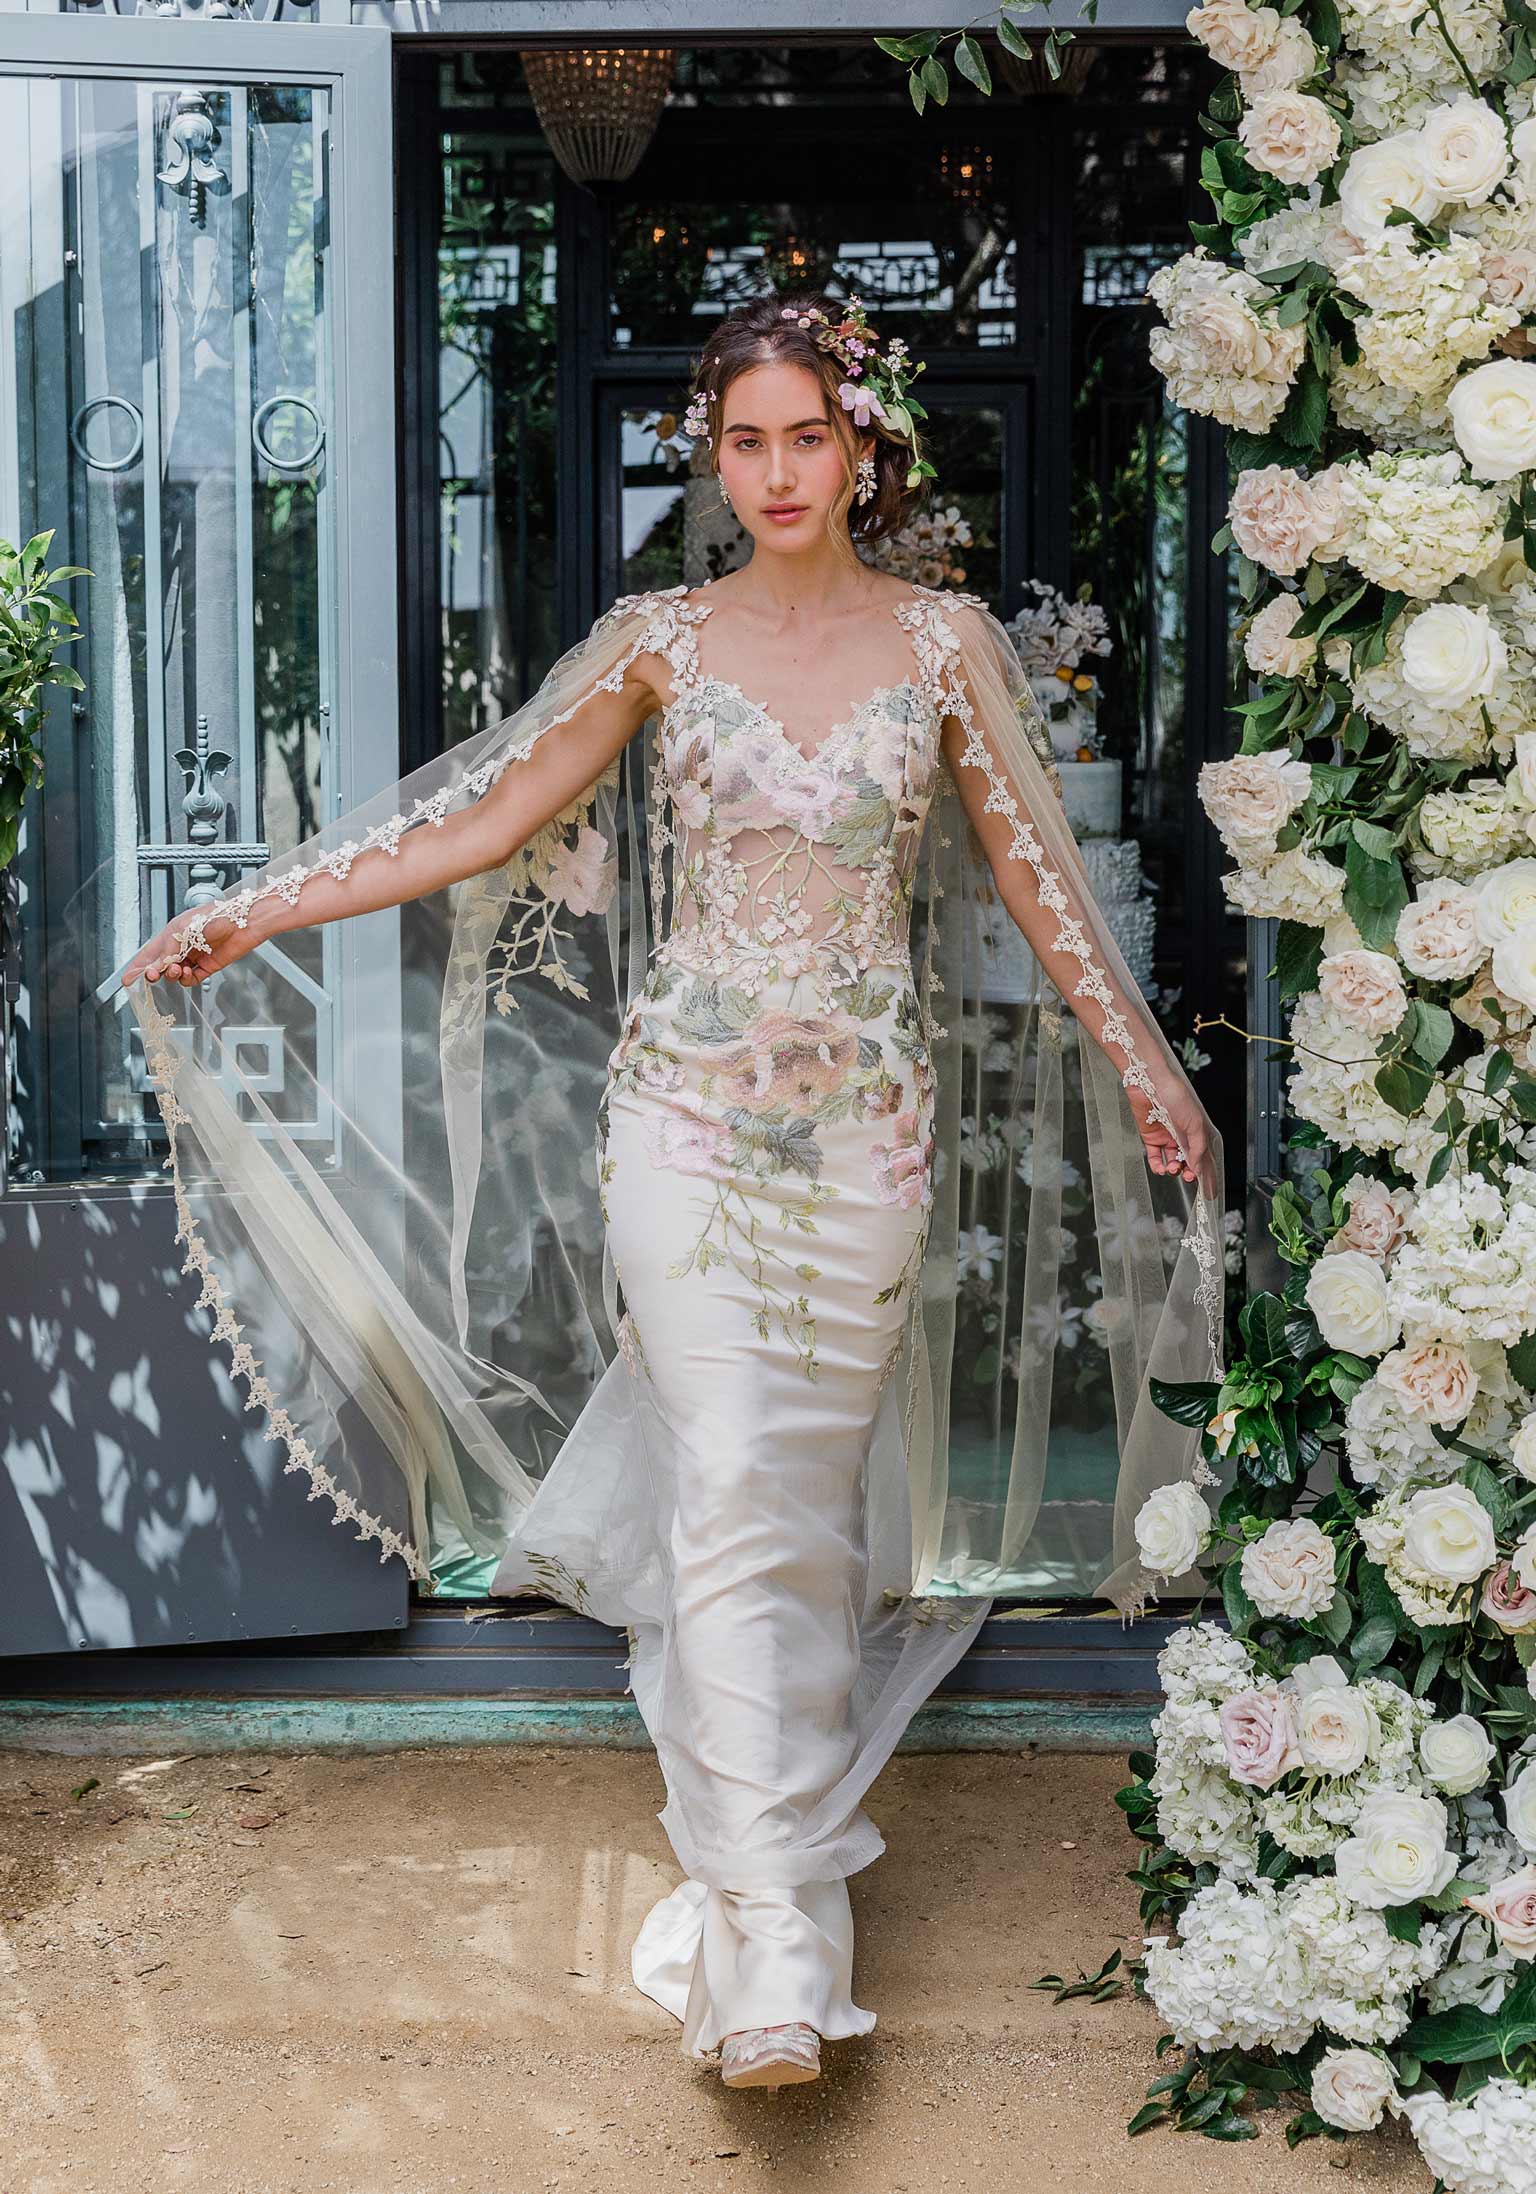 Floral Embroidered Wedding Dress Designed by Claire Pettibone